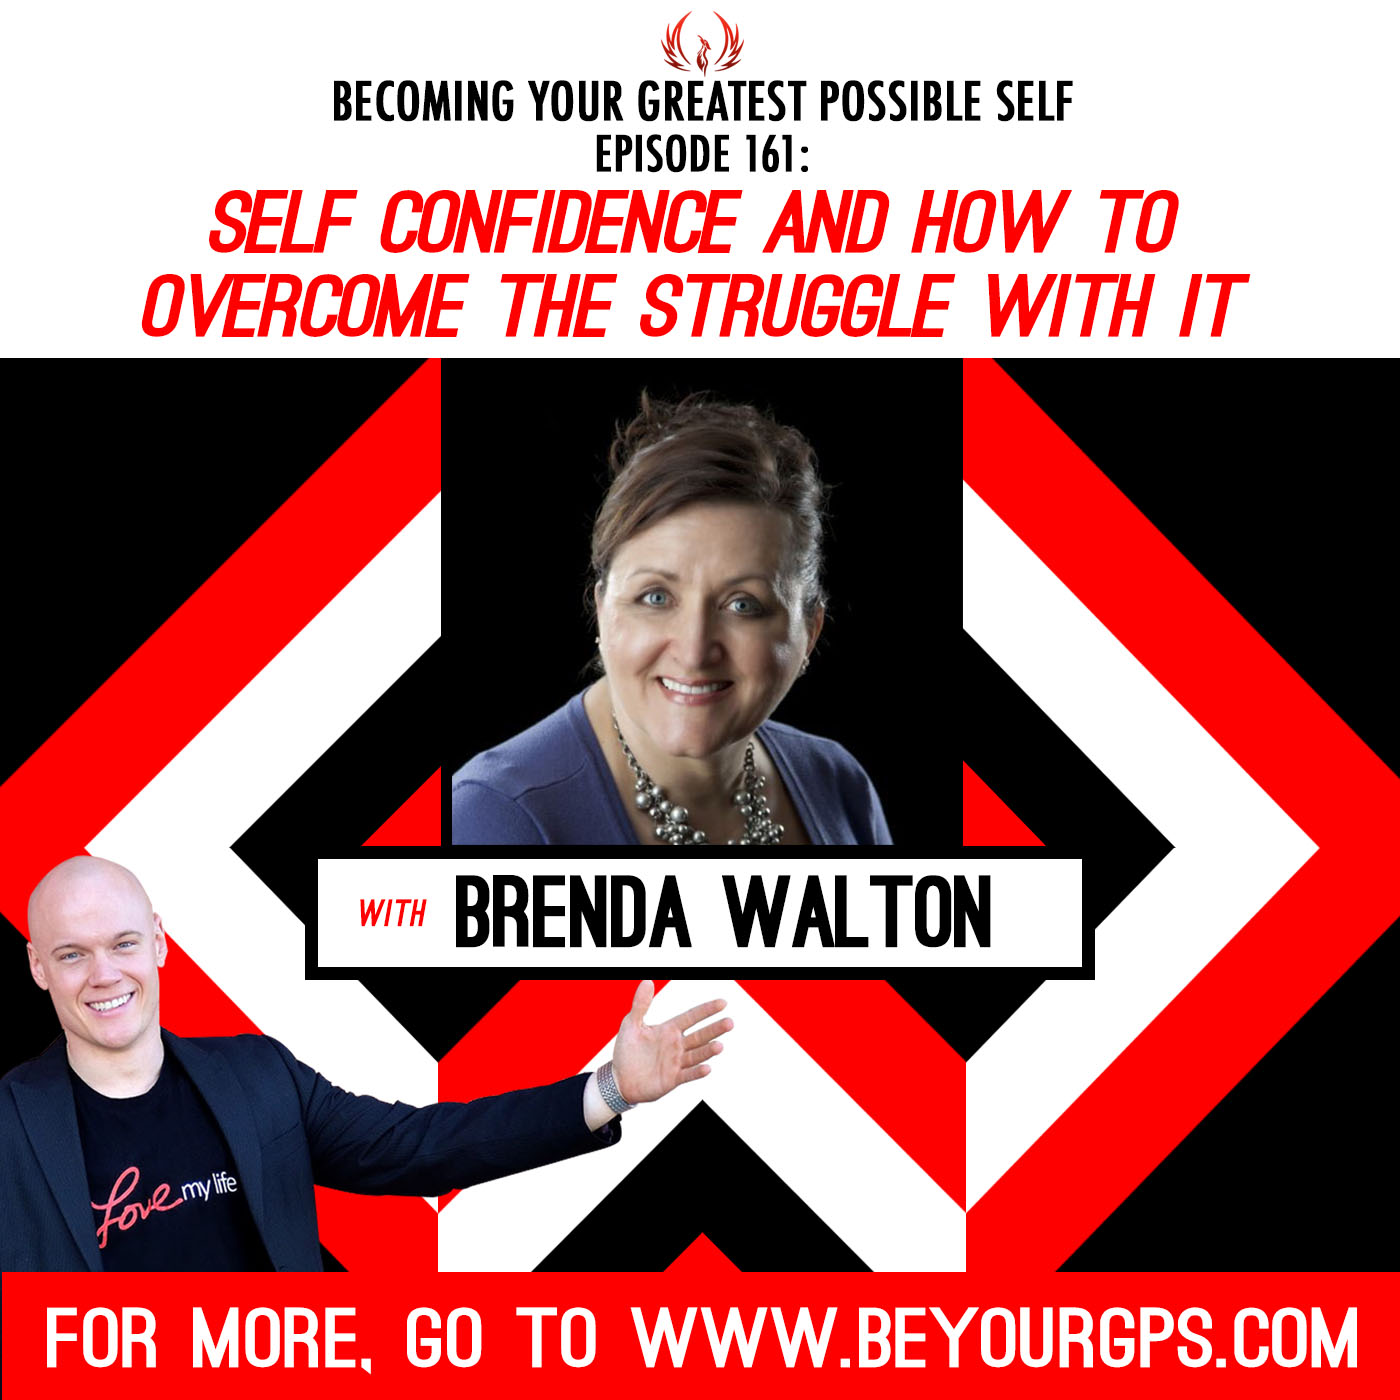 Self Confidence and How to Overcome the Struggle with it with Brenda Walton